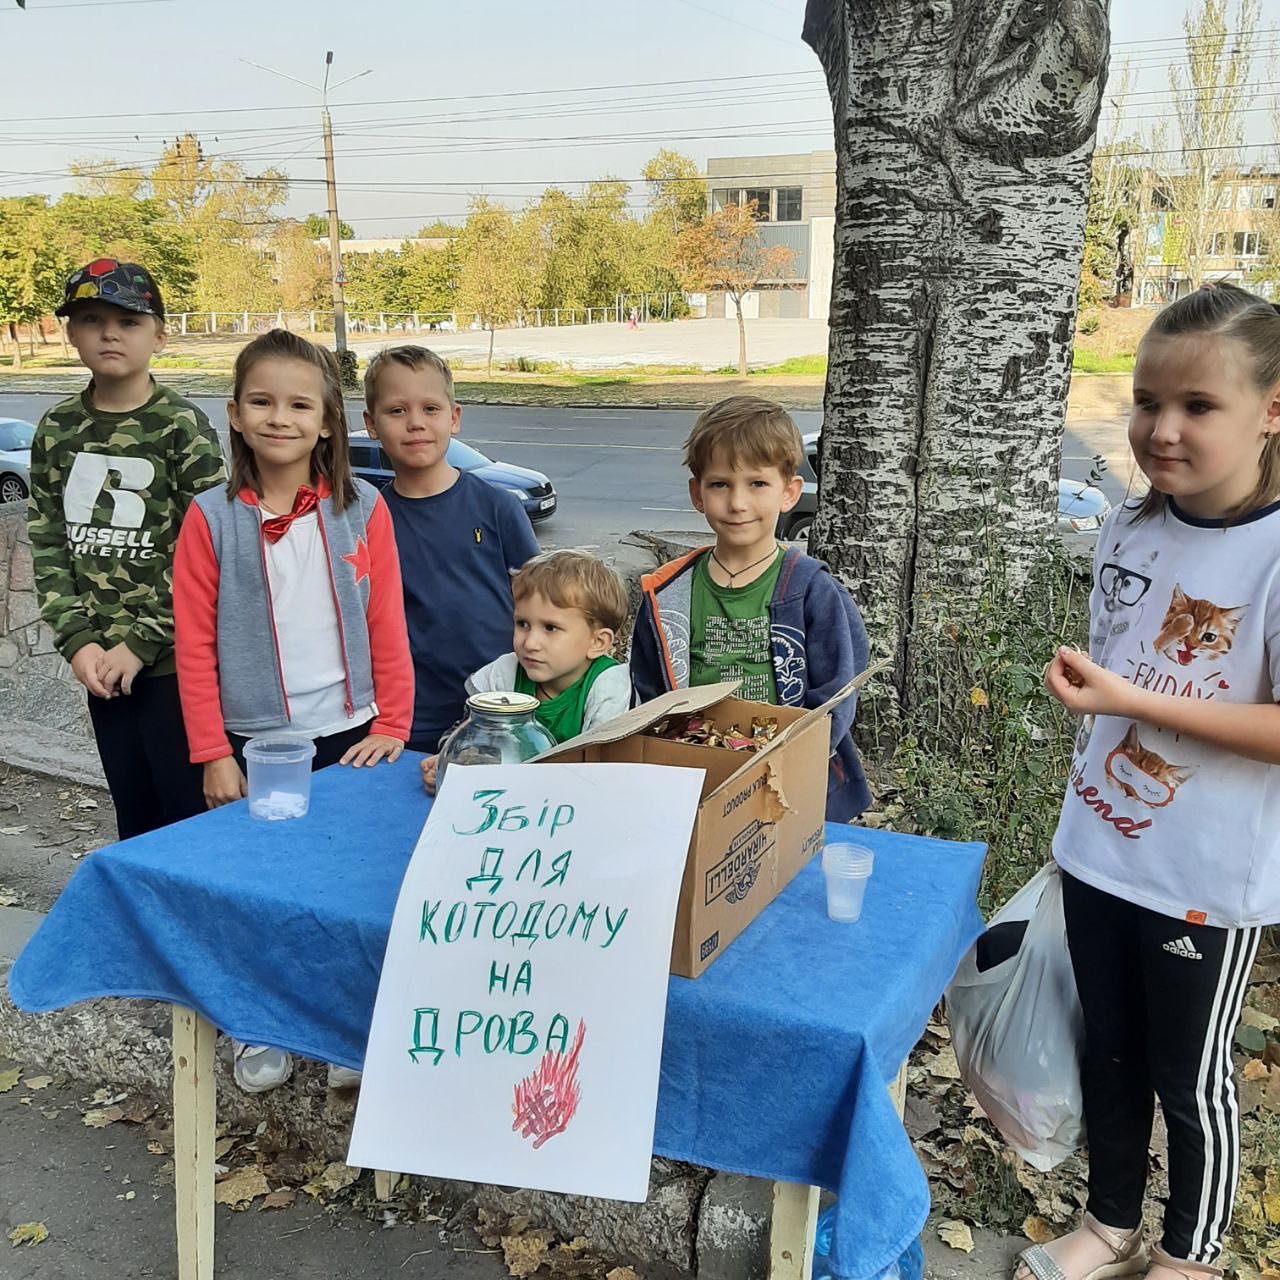 A group of children standing in front of a table with a sign.